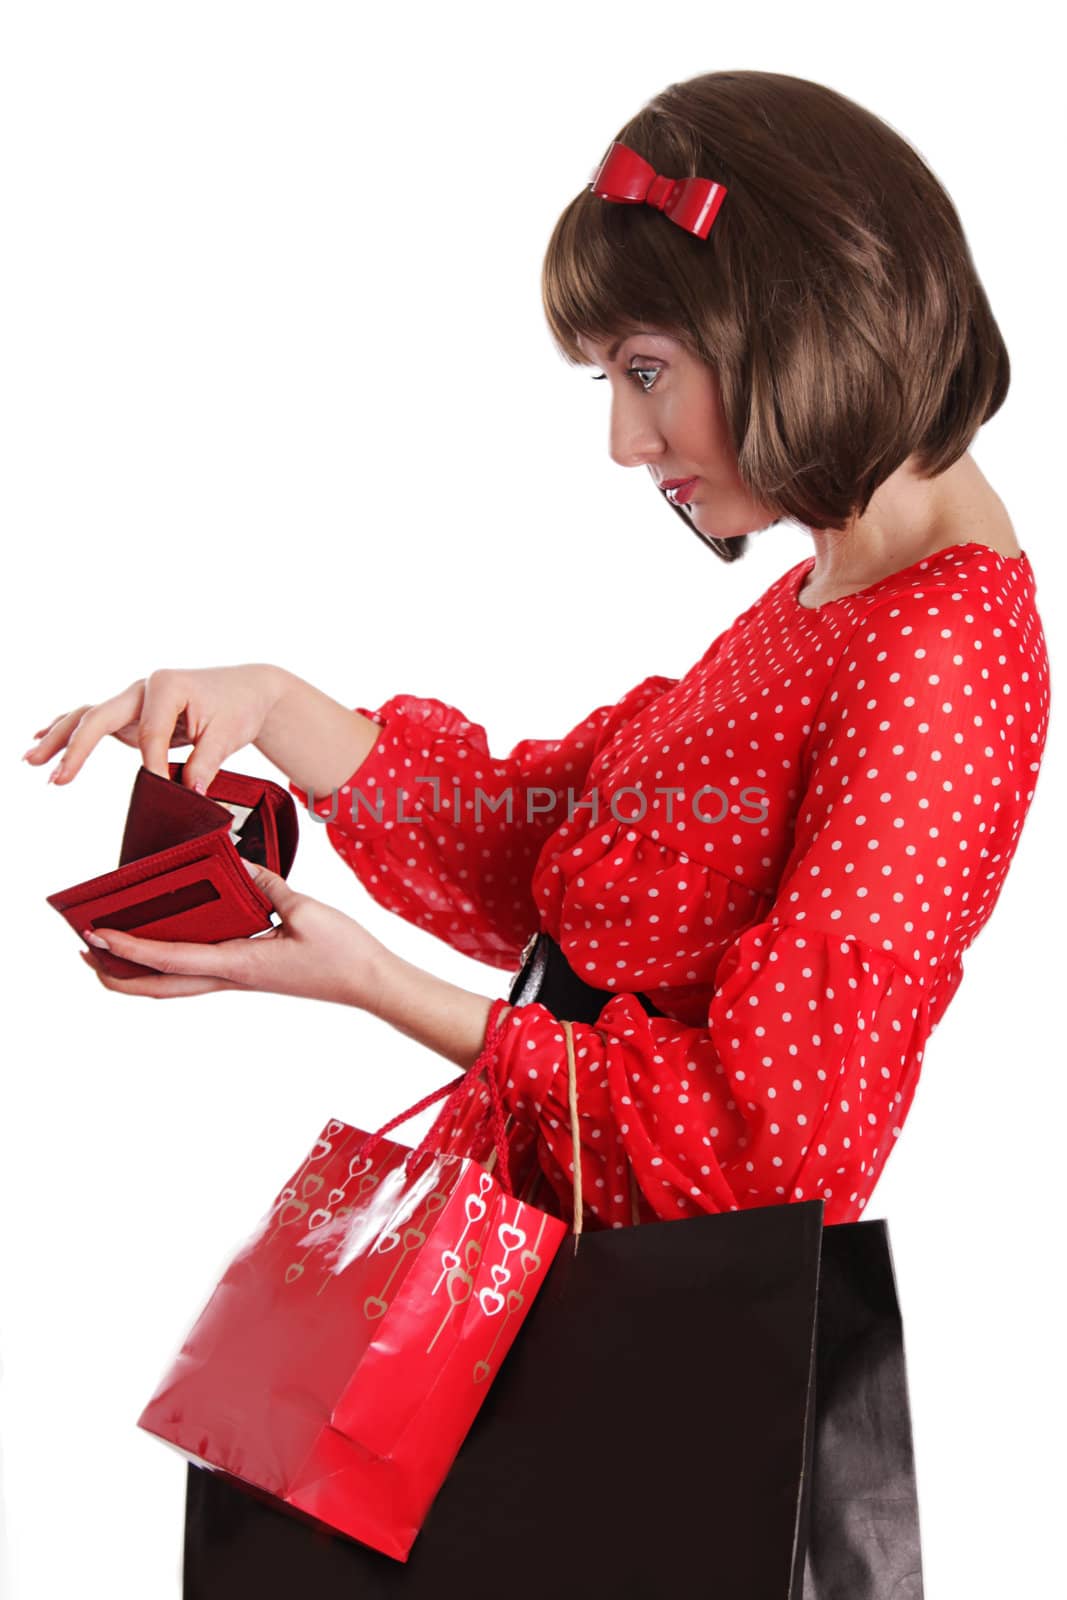 Woman with shopping bags and no money in purse by Angel_a